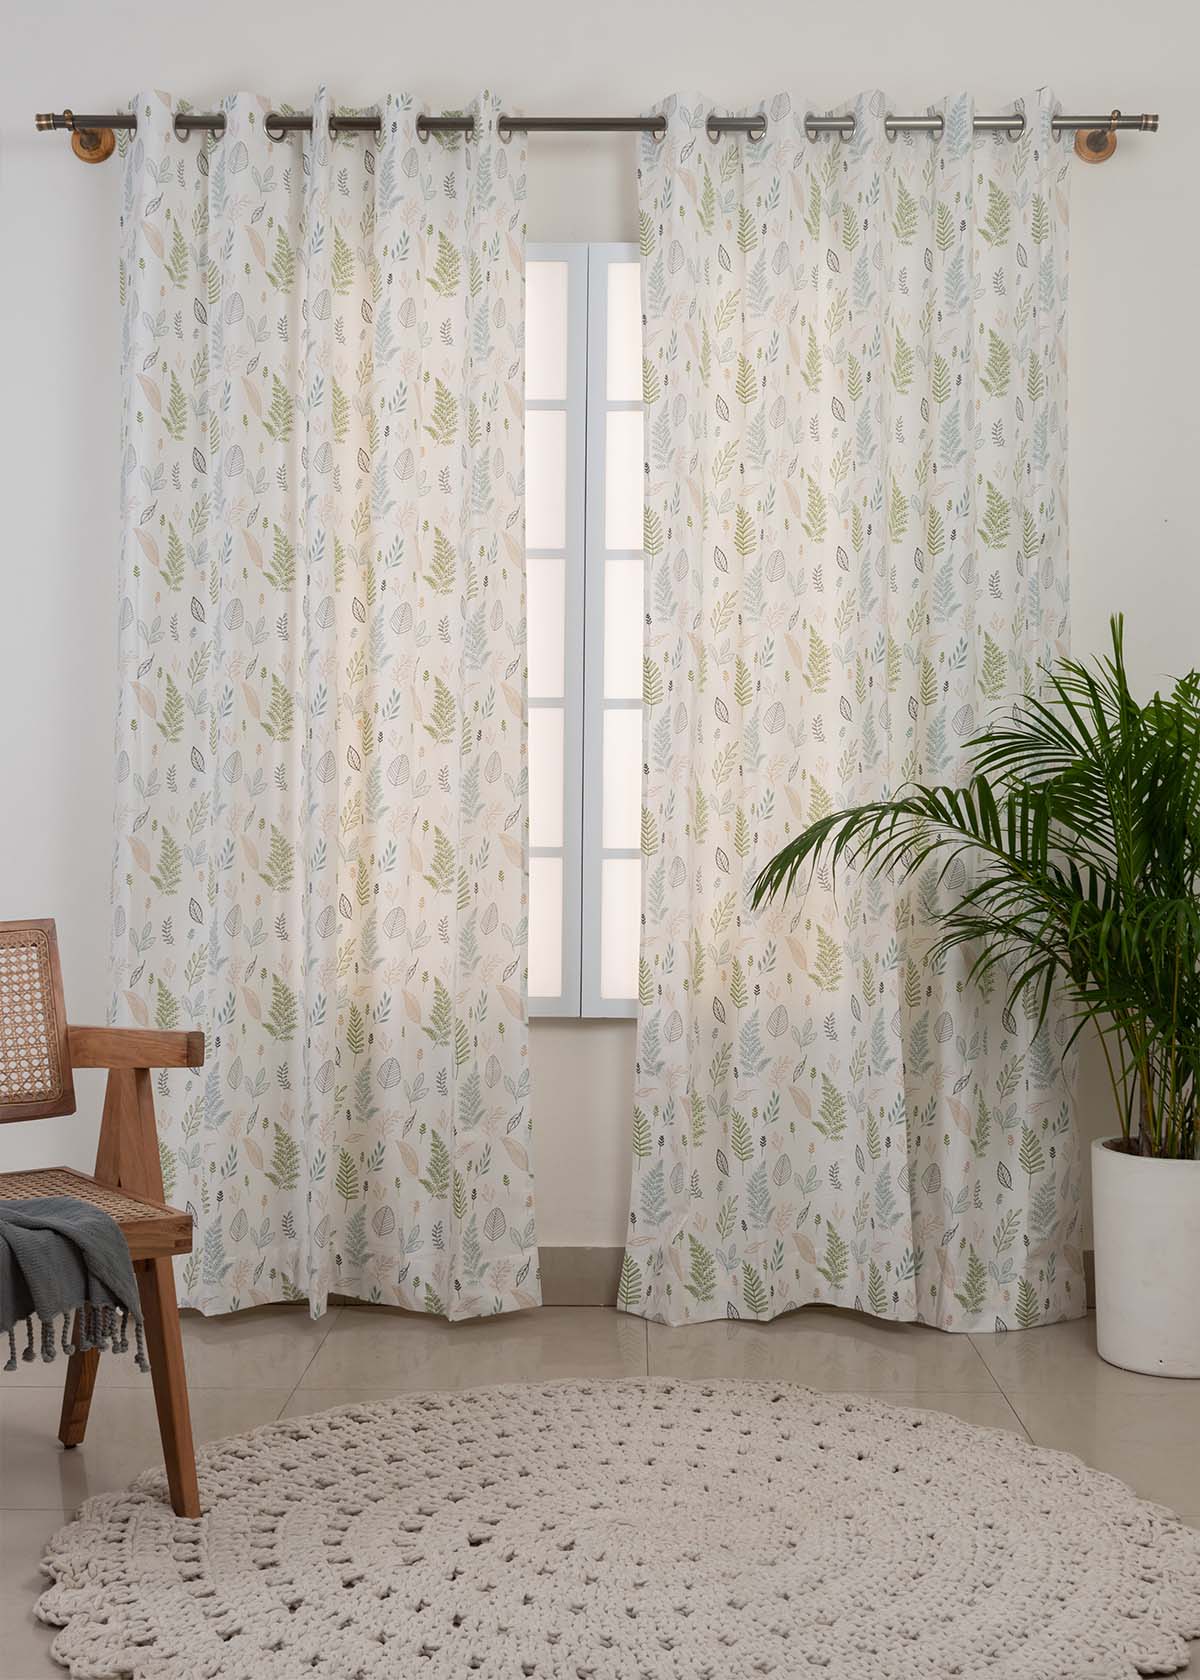 Rustling Leaves Printed Cotton Curtain - Green